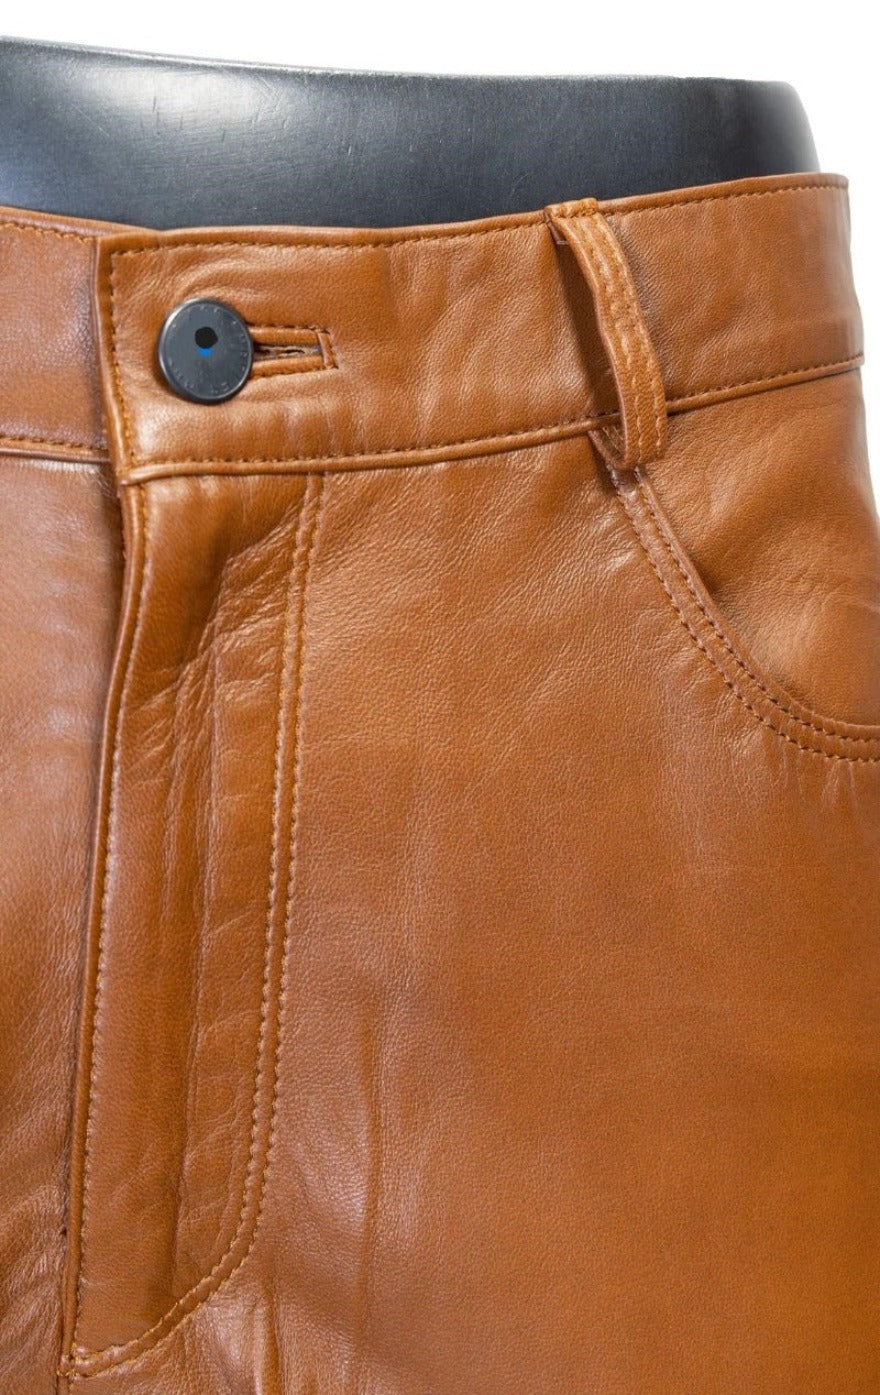 Photo of our Brown Leather Jeans, close up view of waist